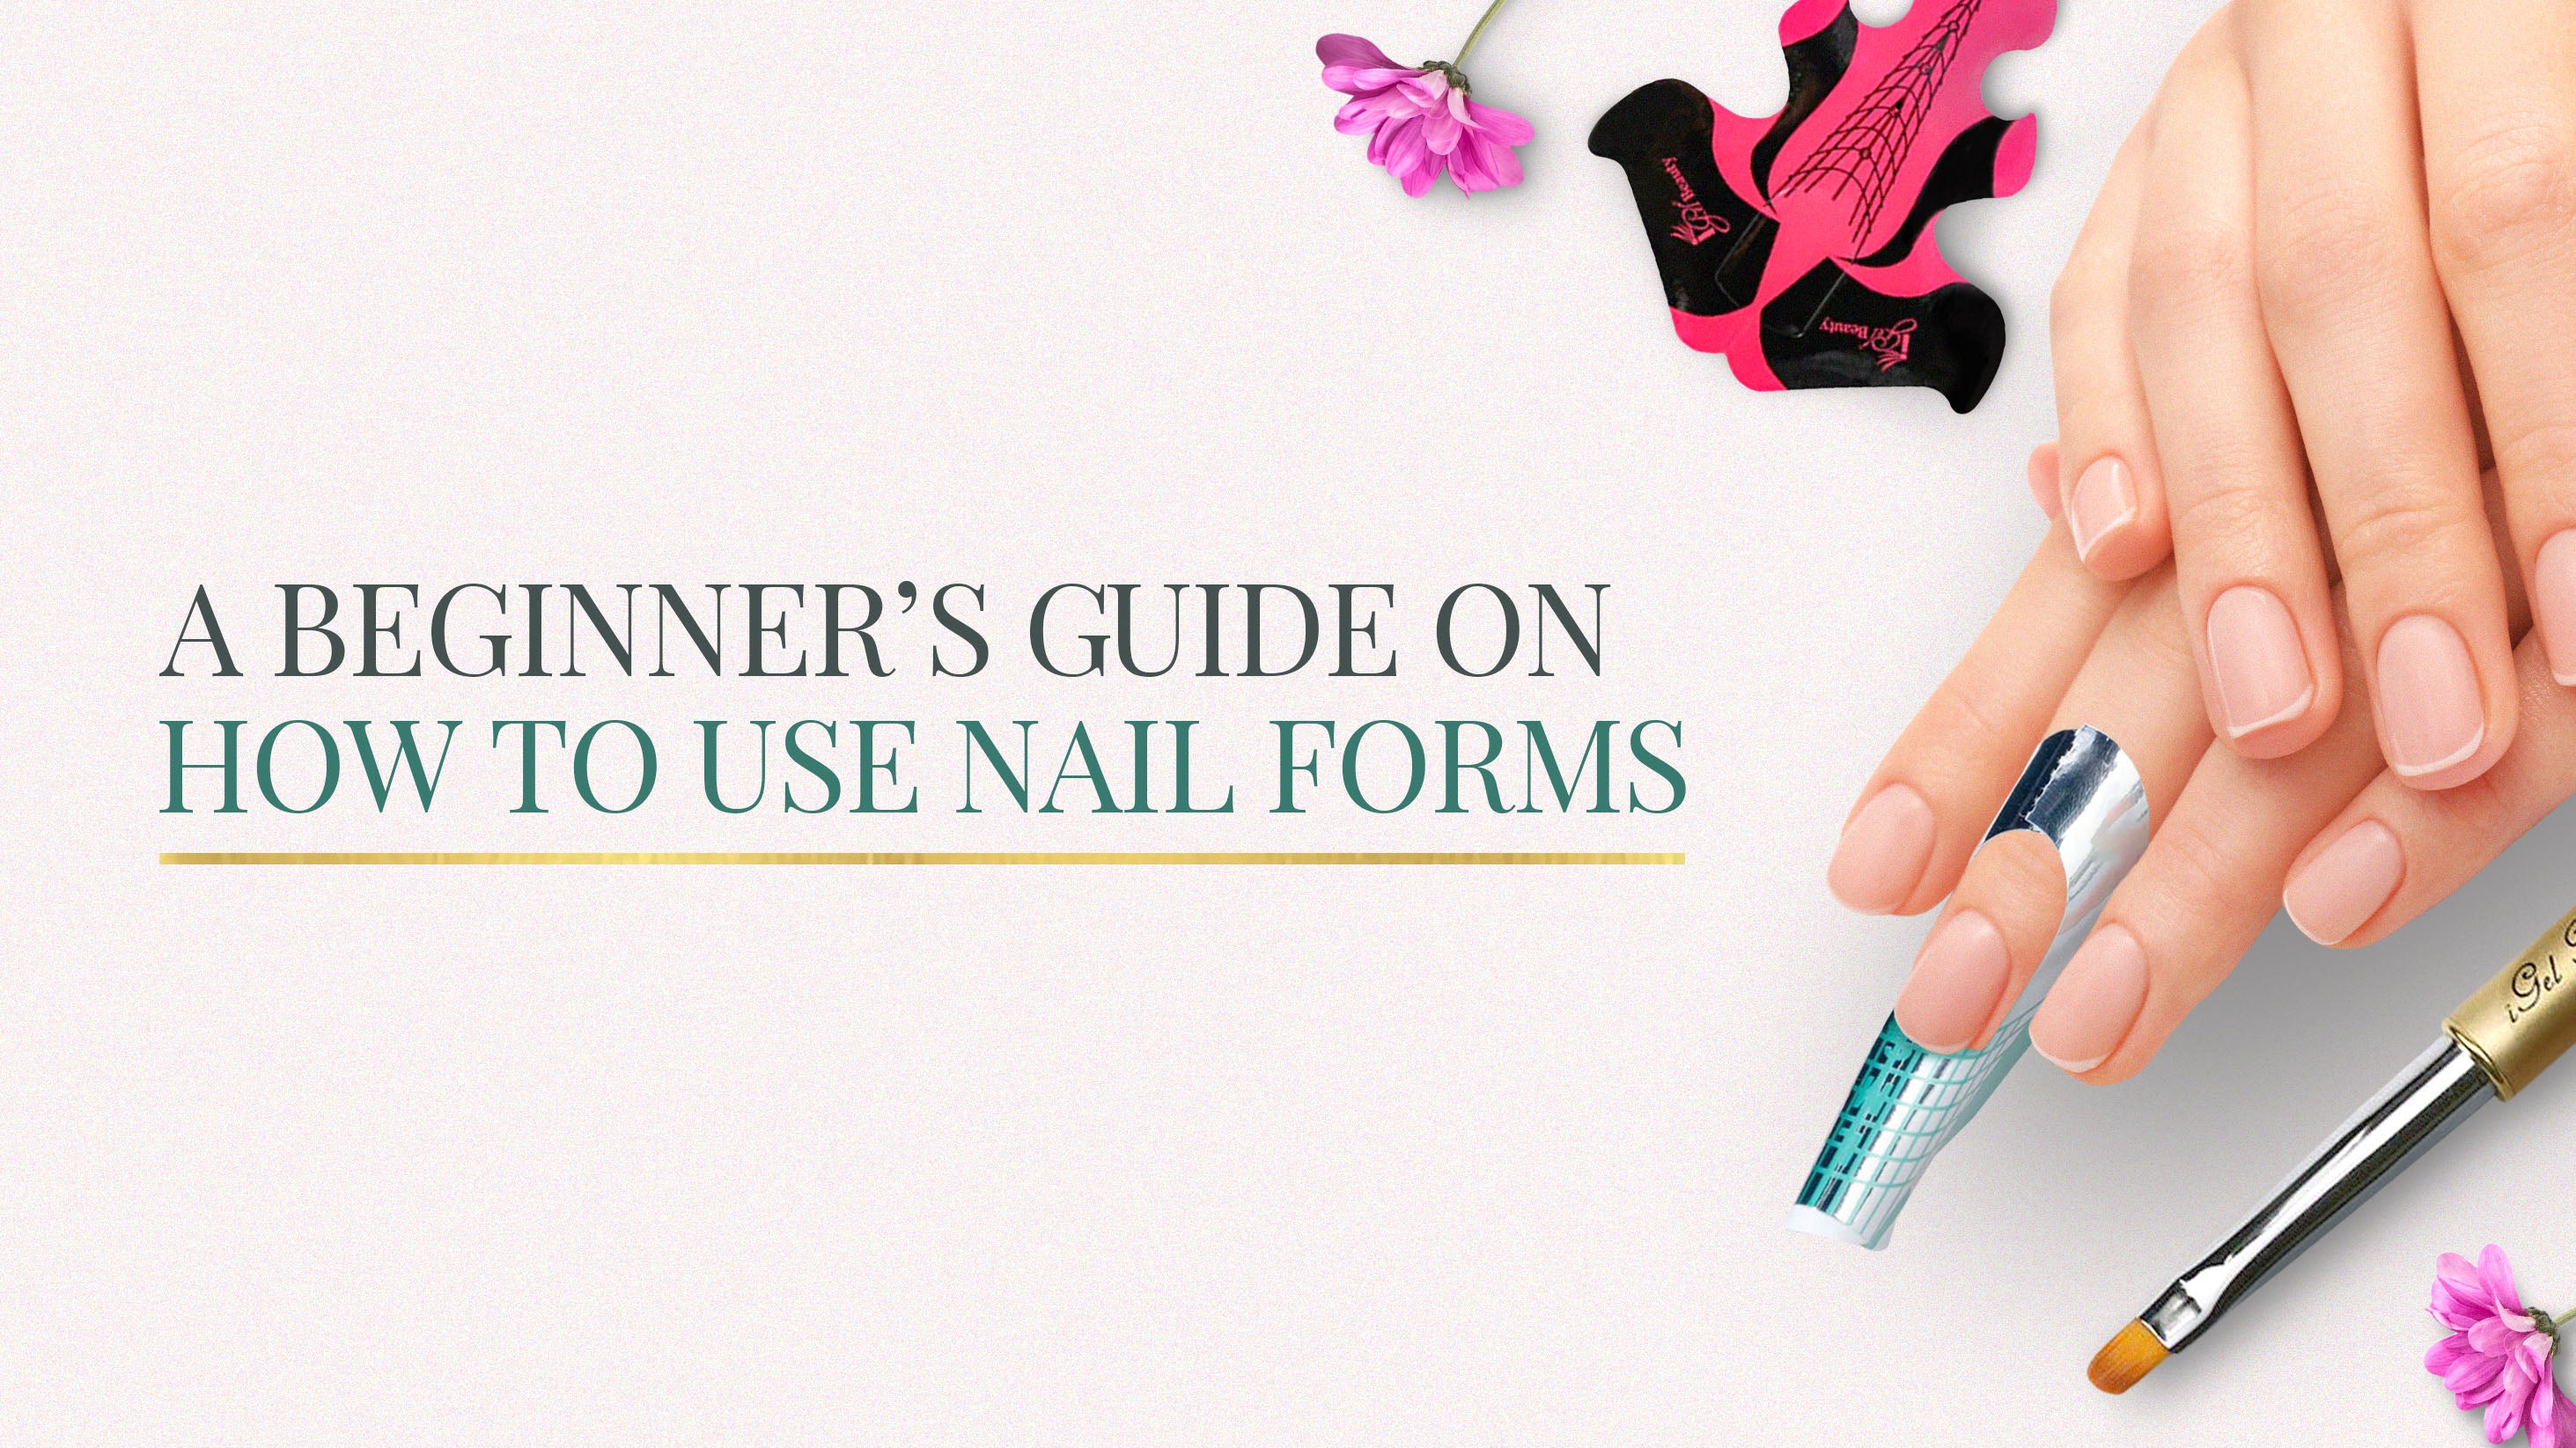 Beginner's Guide: Gel vs. Acrylic Nail Extensions at Home